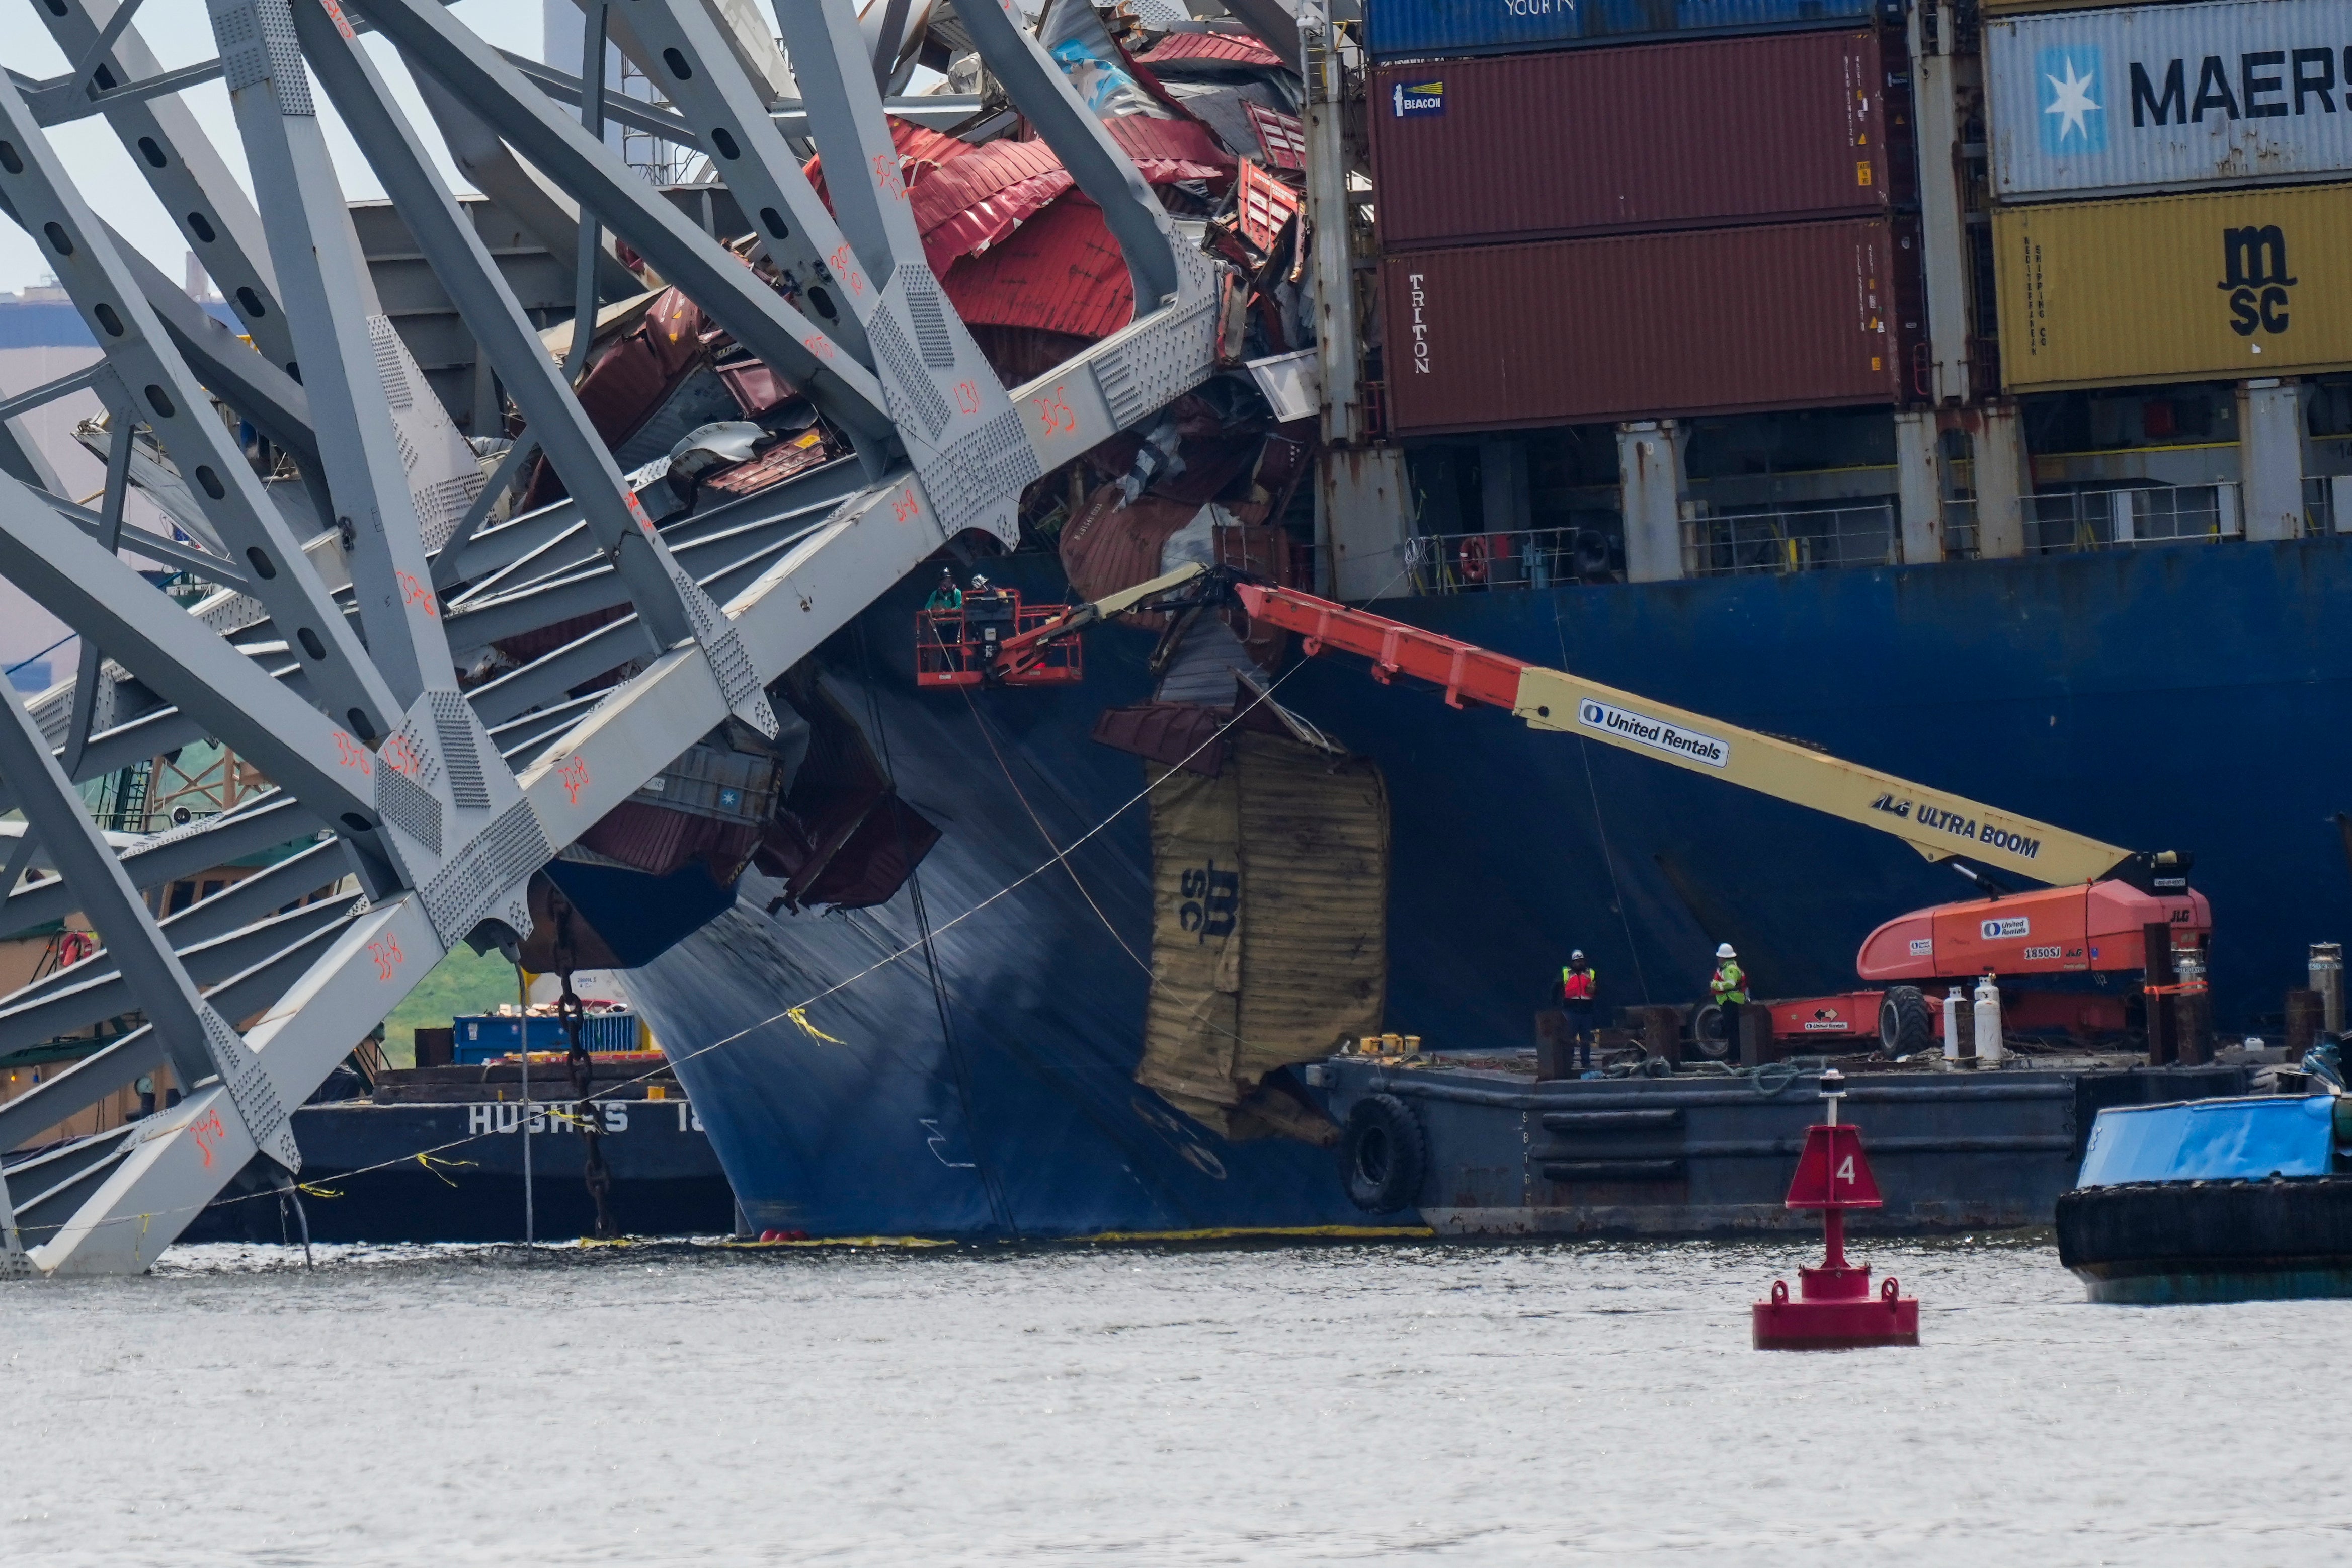 Salvage workers have continued to remove the large pieces of debris a month after the bridge collapsed in Baltimore